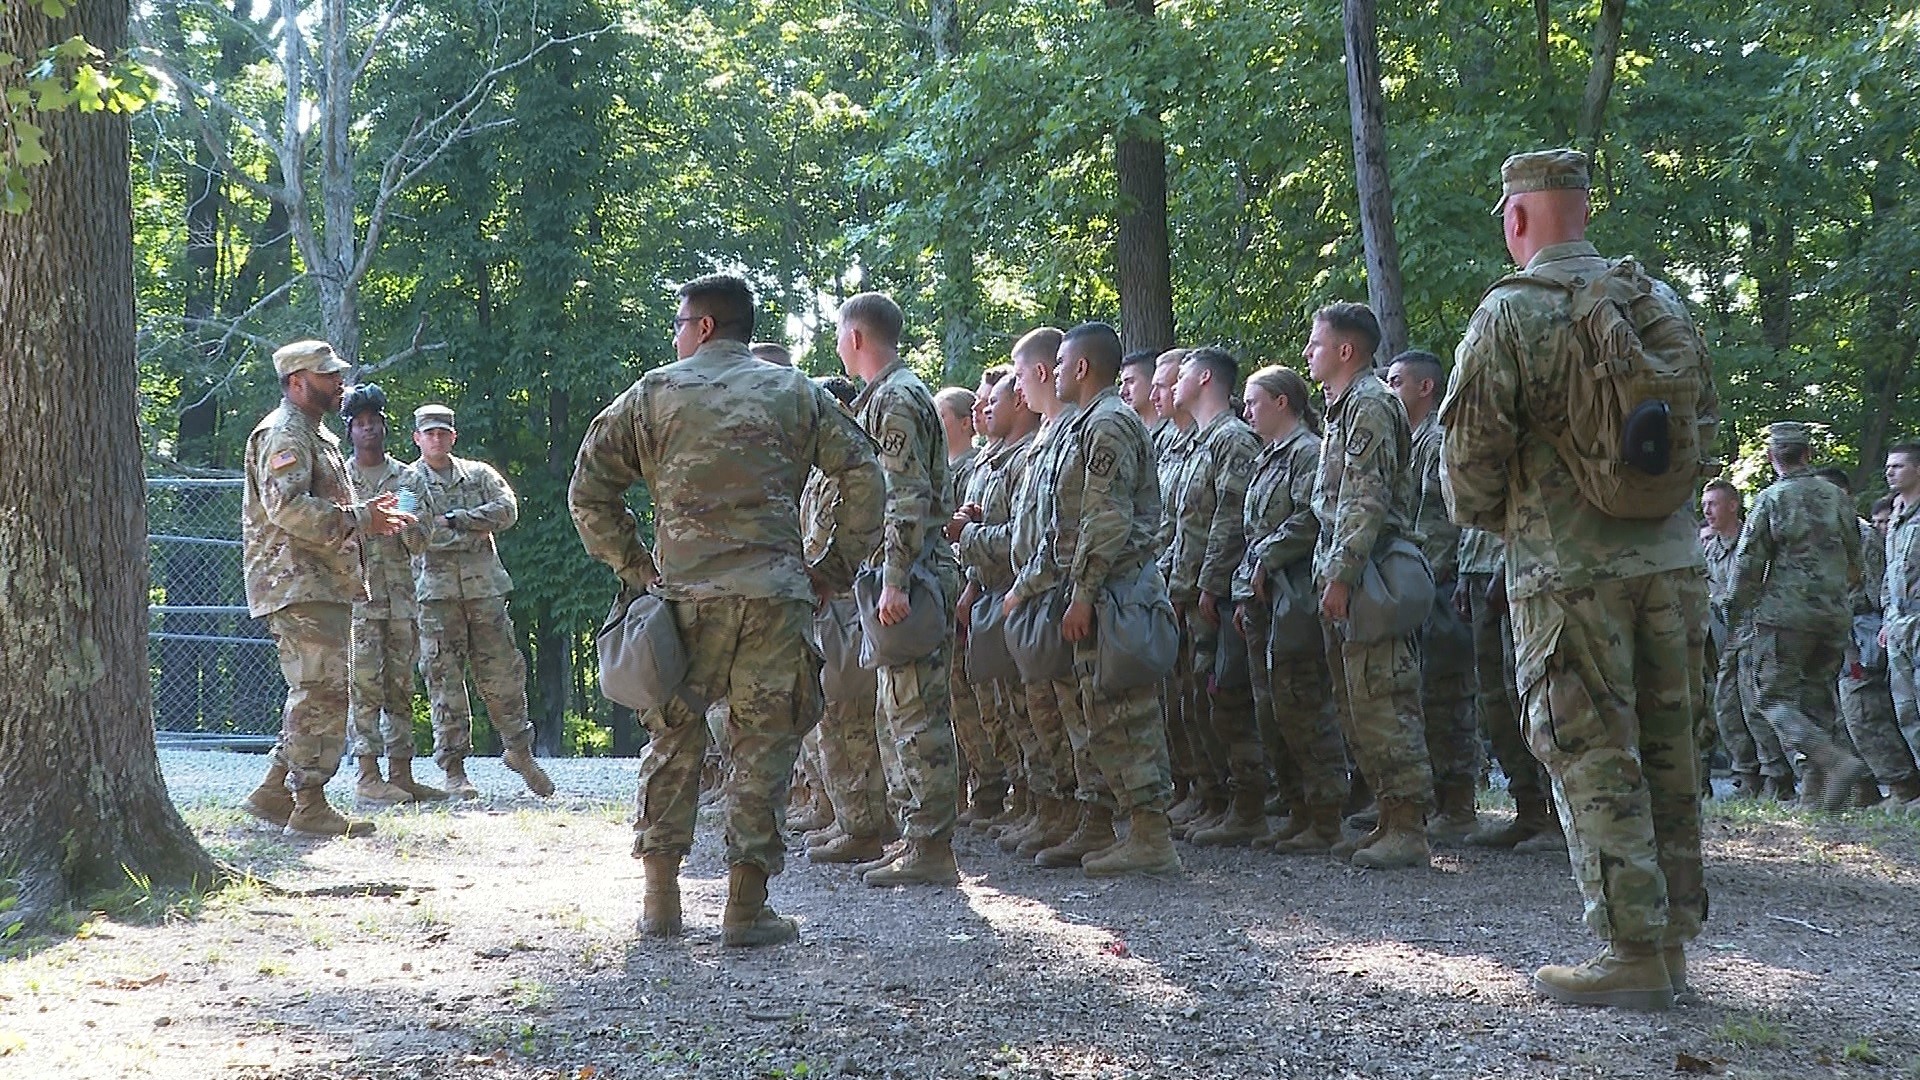 Cadets learn skills they will need to know as officers in the Army.